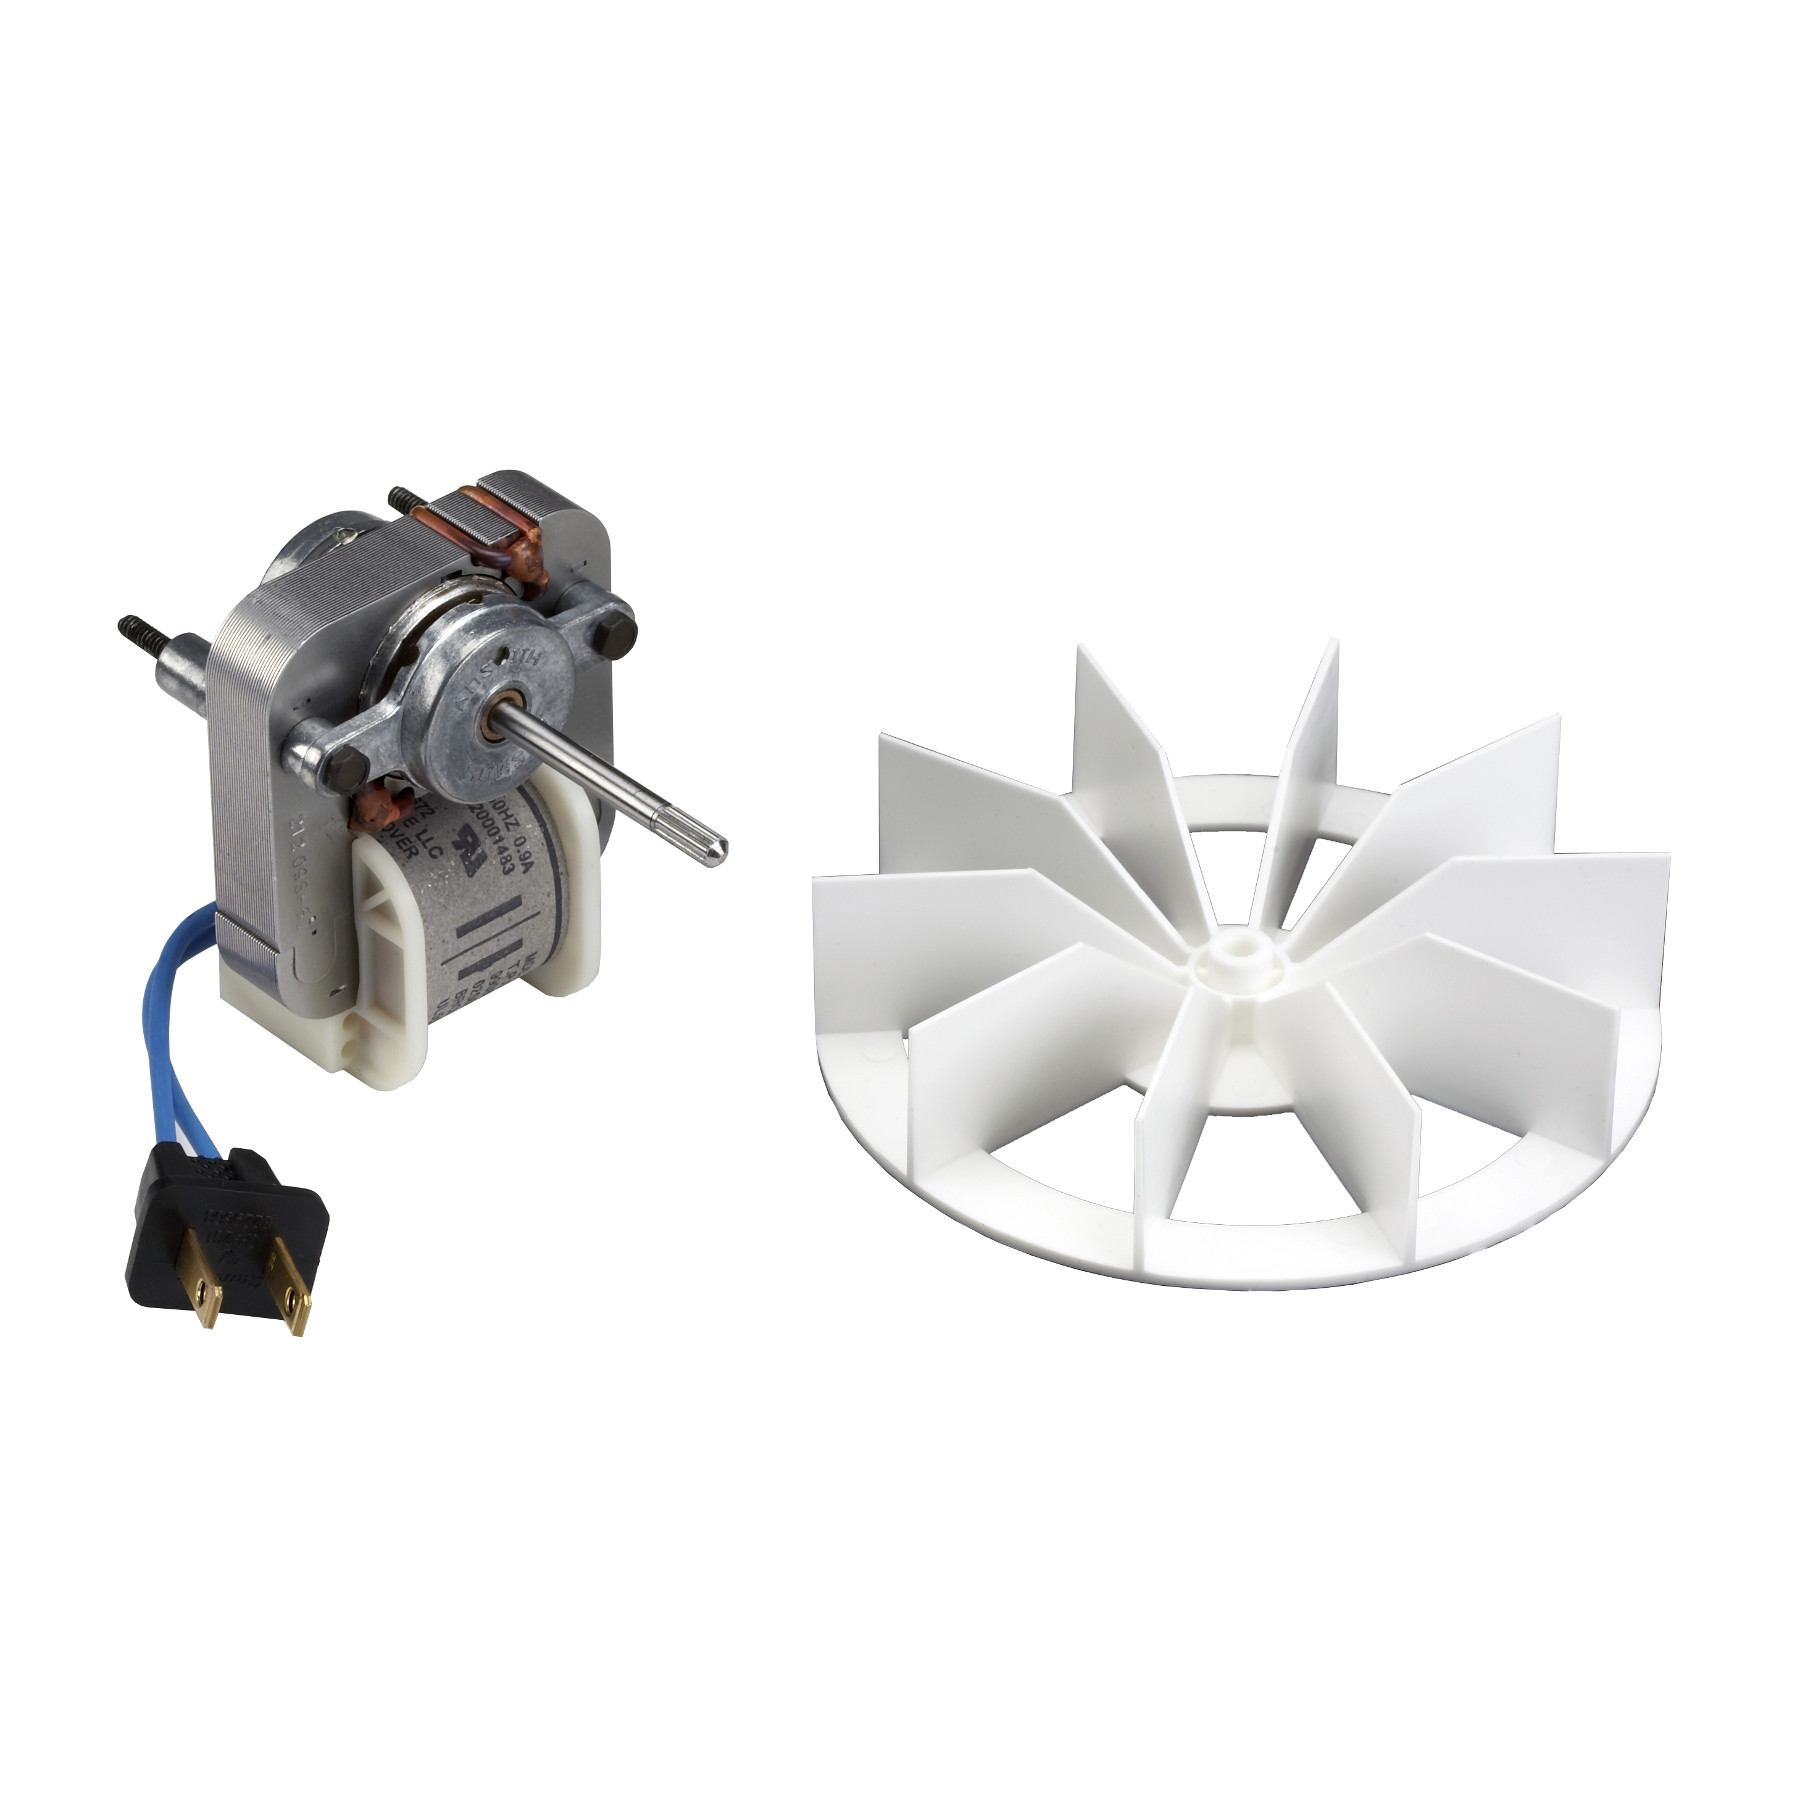 Broan-NuTone® 50CFM Replacement Motor and Wheel